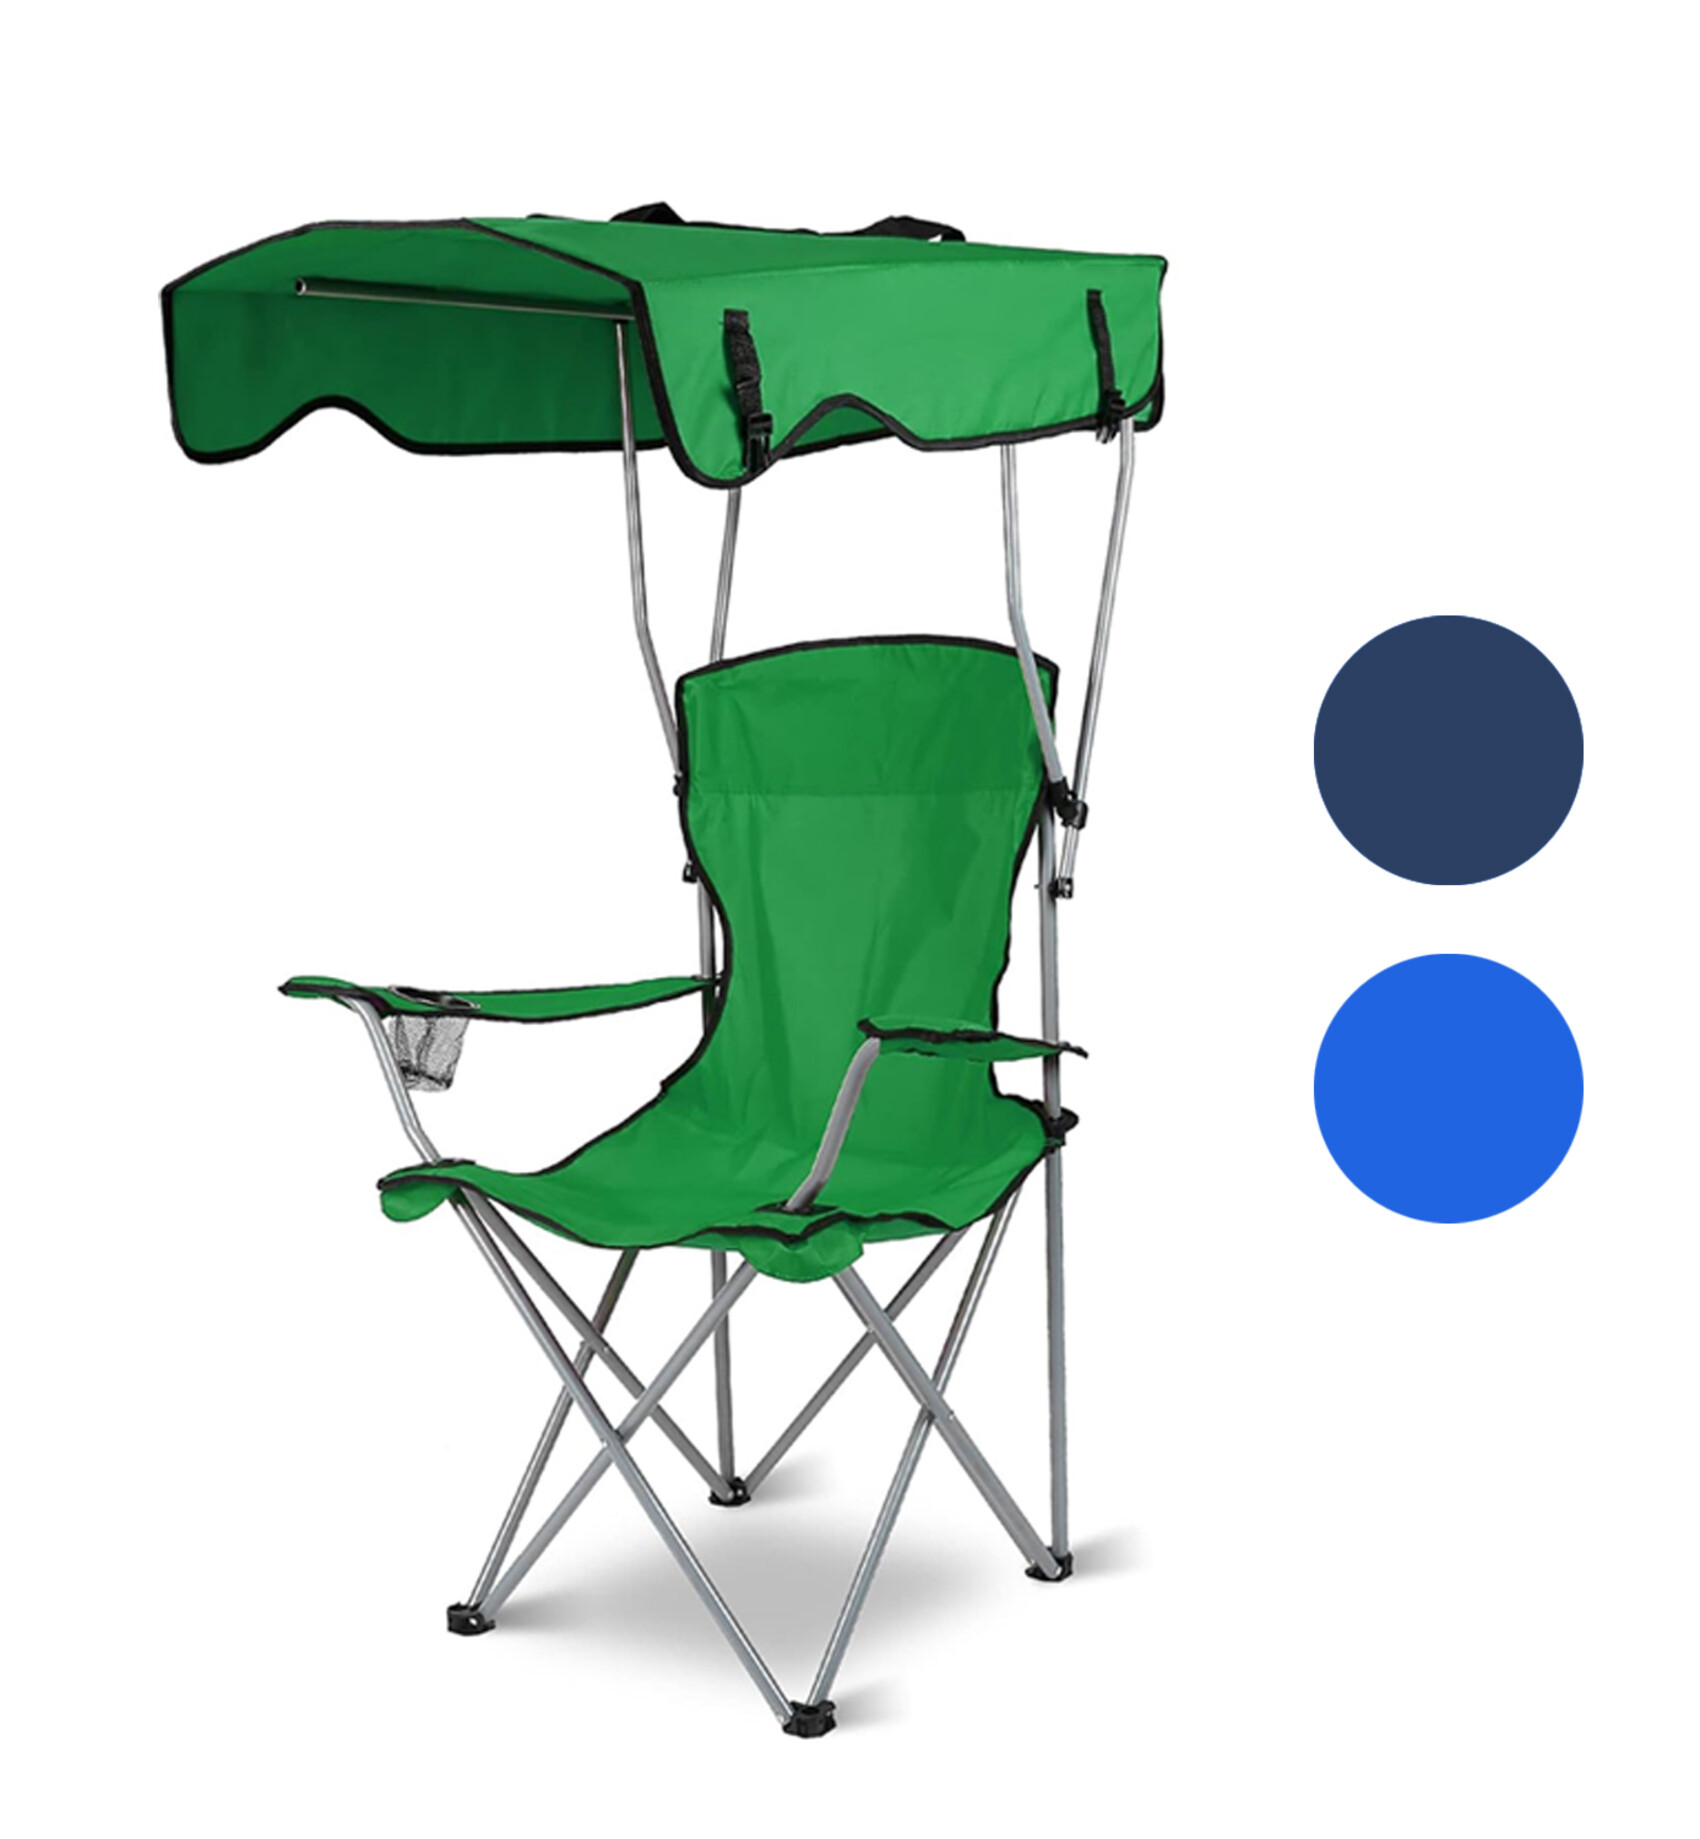 CAMPMATE FOLDING BEACH CHAIR CM-7880 WITH CANOPY SUN PROTECTION ROOF | FOR CAMPING - FISHING -OUTDOOR